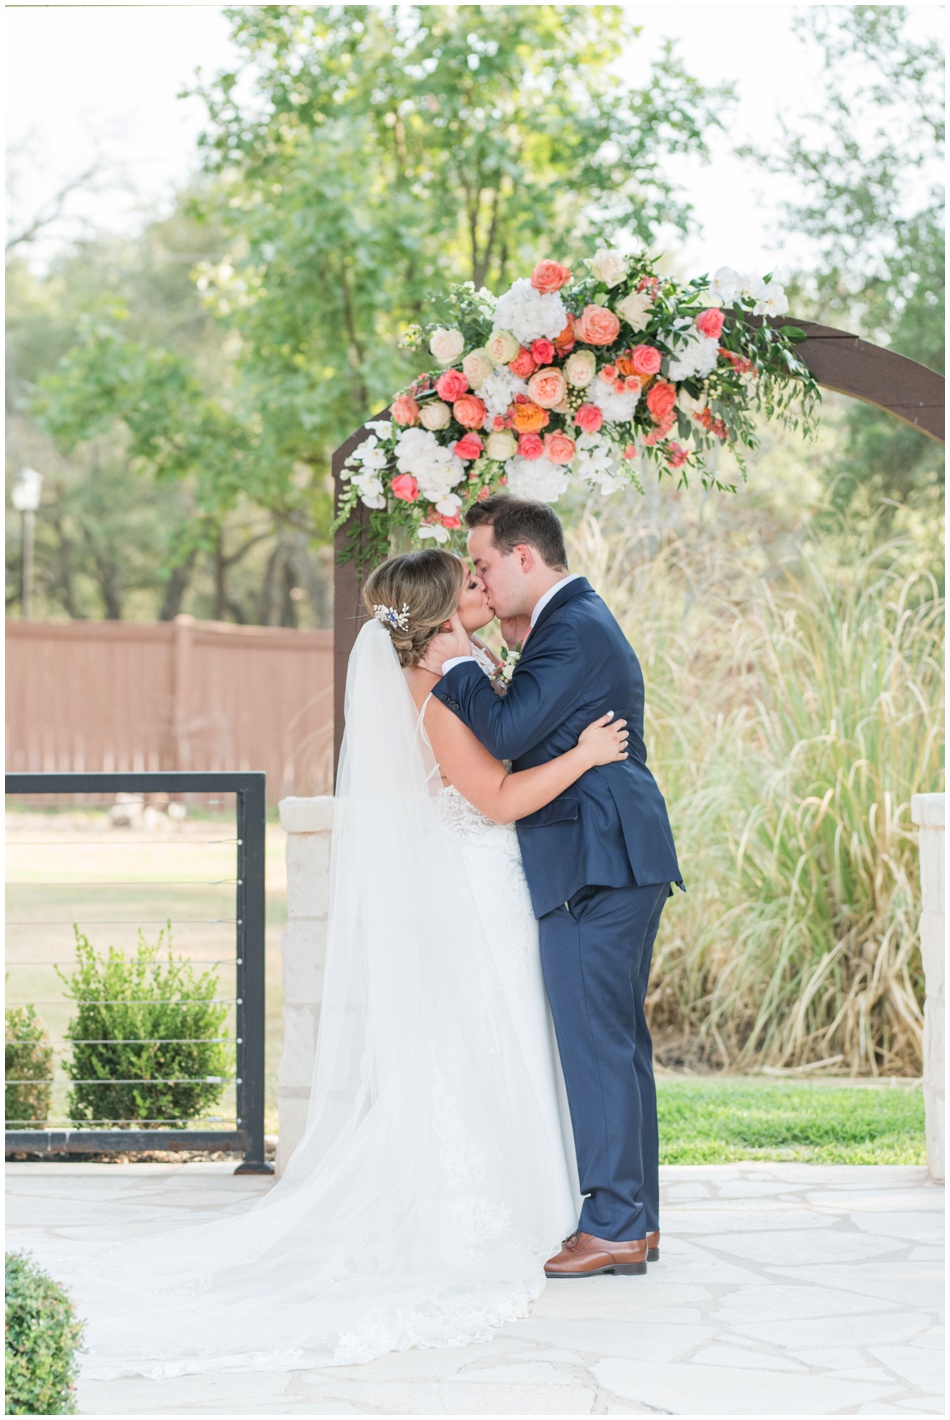 First Kiss as husband and wife at The Milestone wedding ceremony with coral flowers on arch